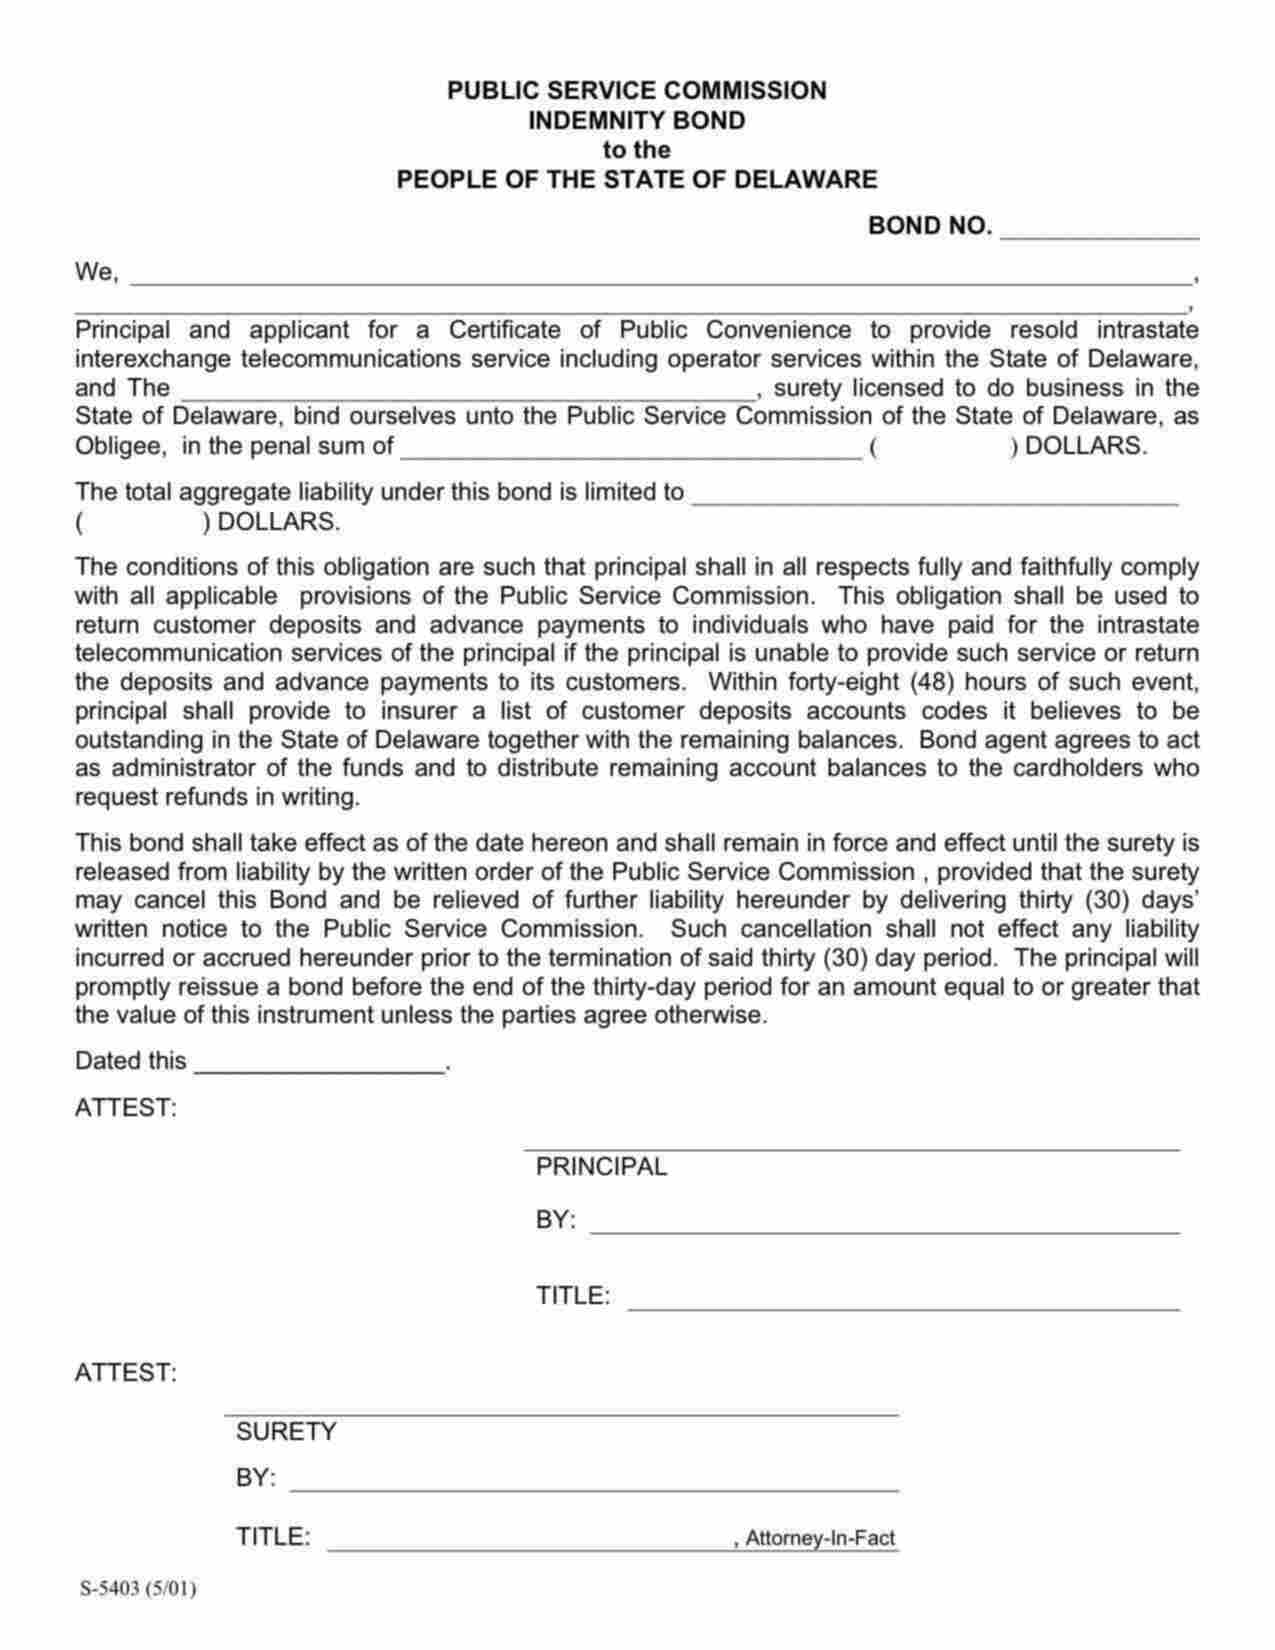 Delaware Telecommunications Service Certificate of Public Convenience Indemnity Bond Form